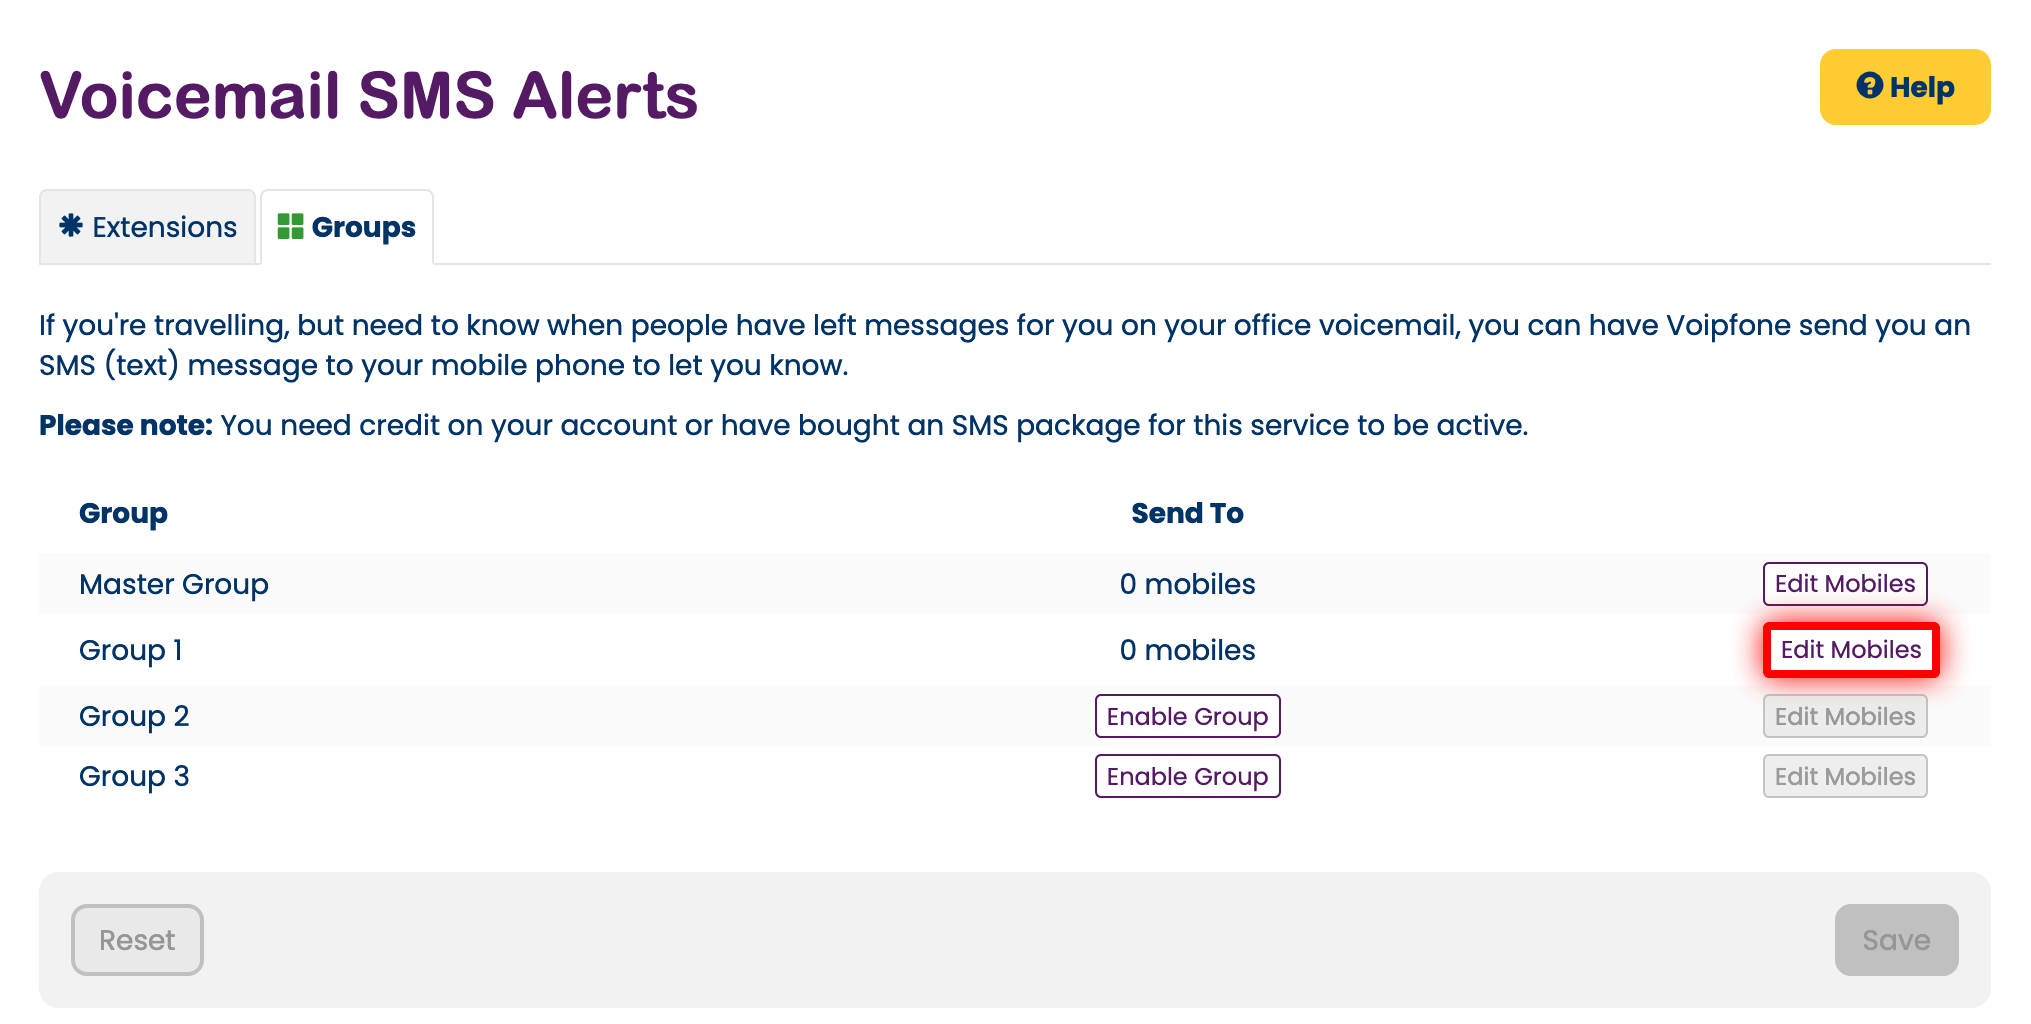 Modfying the group voipcemail SMS alert destinations